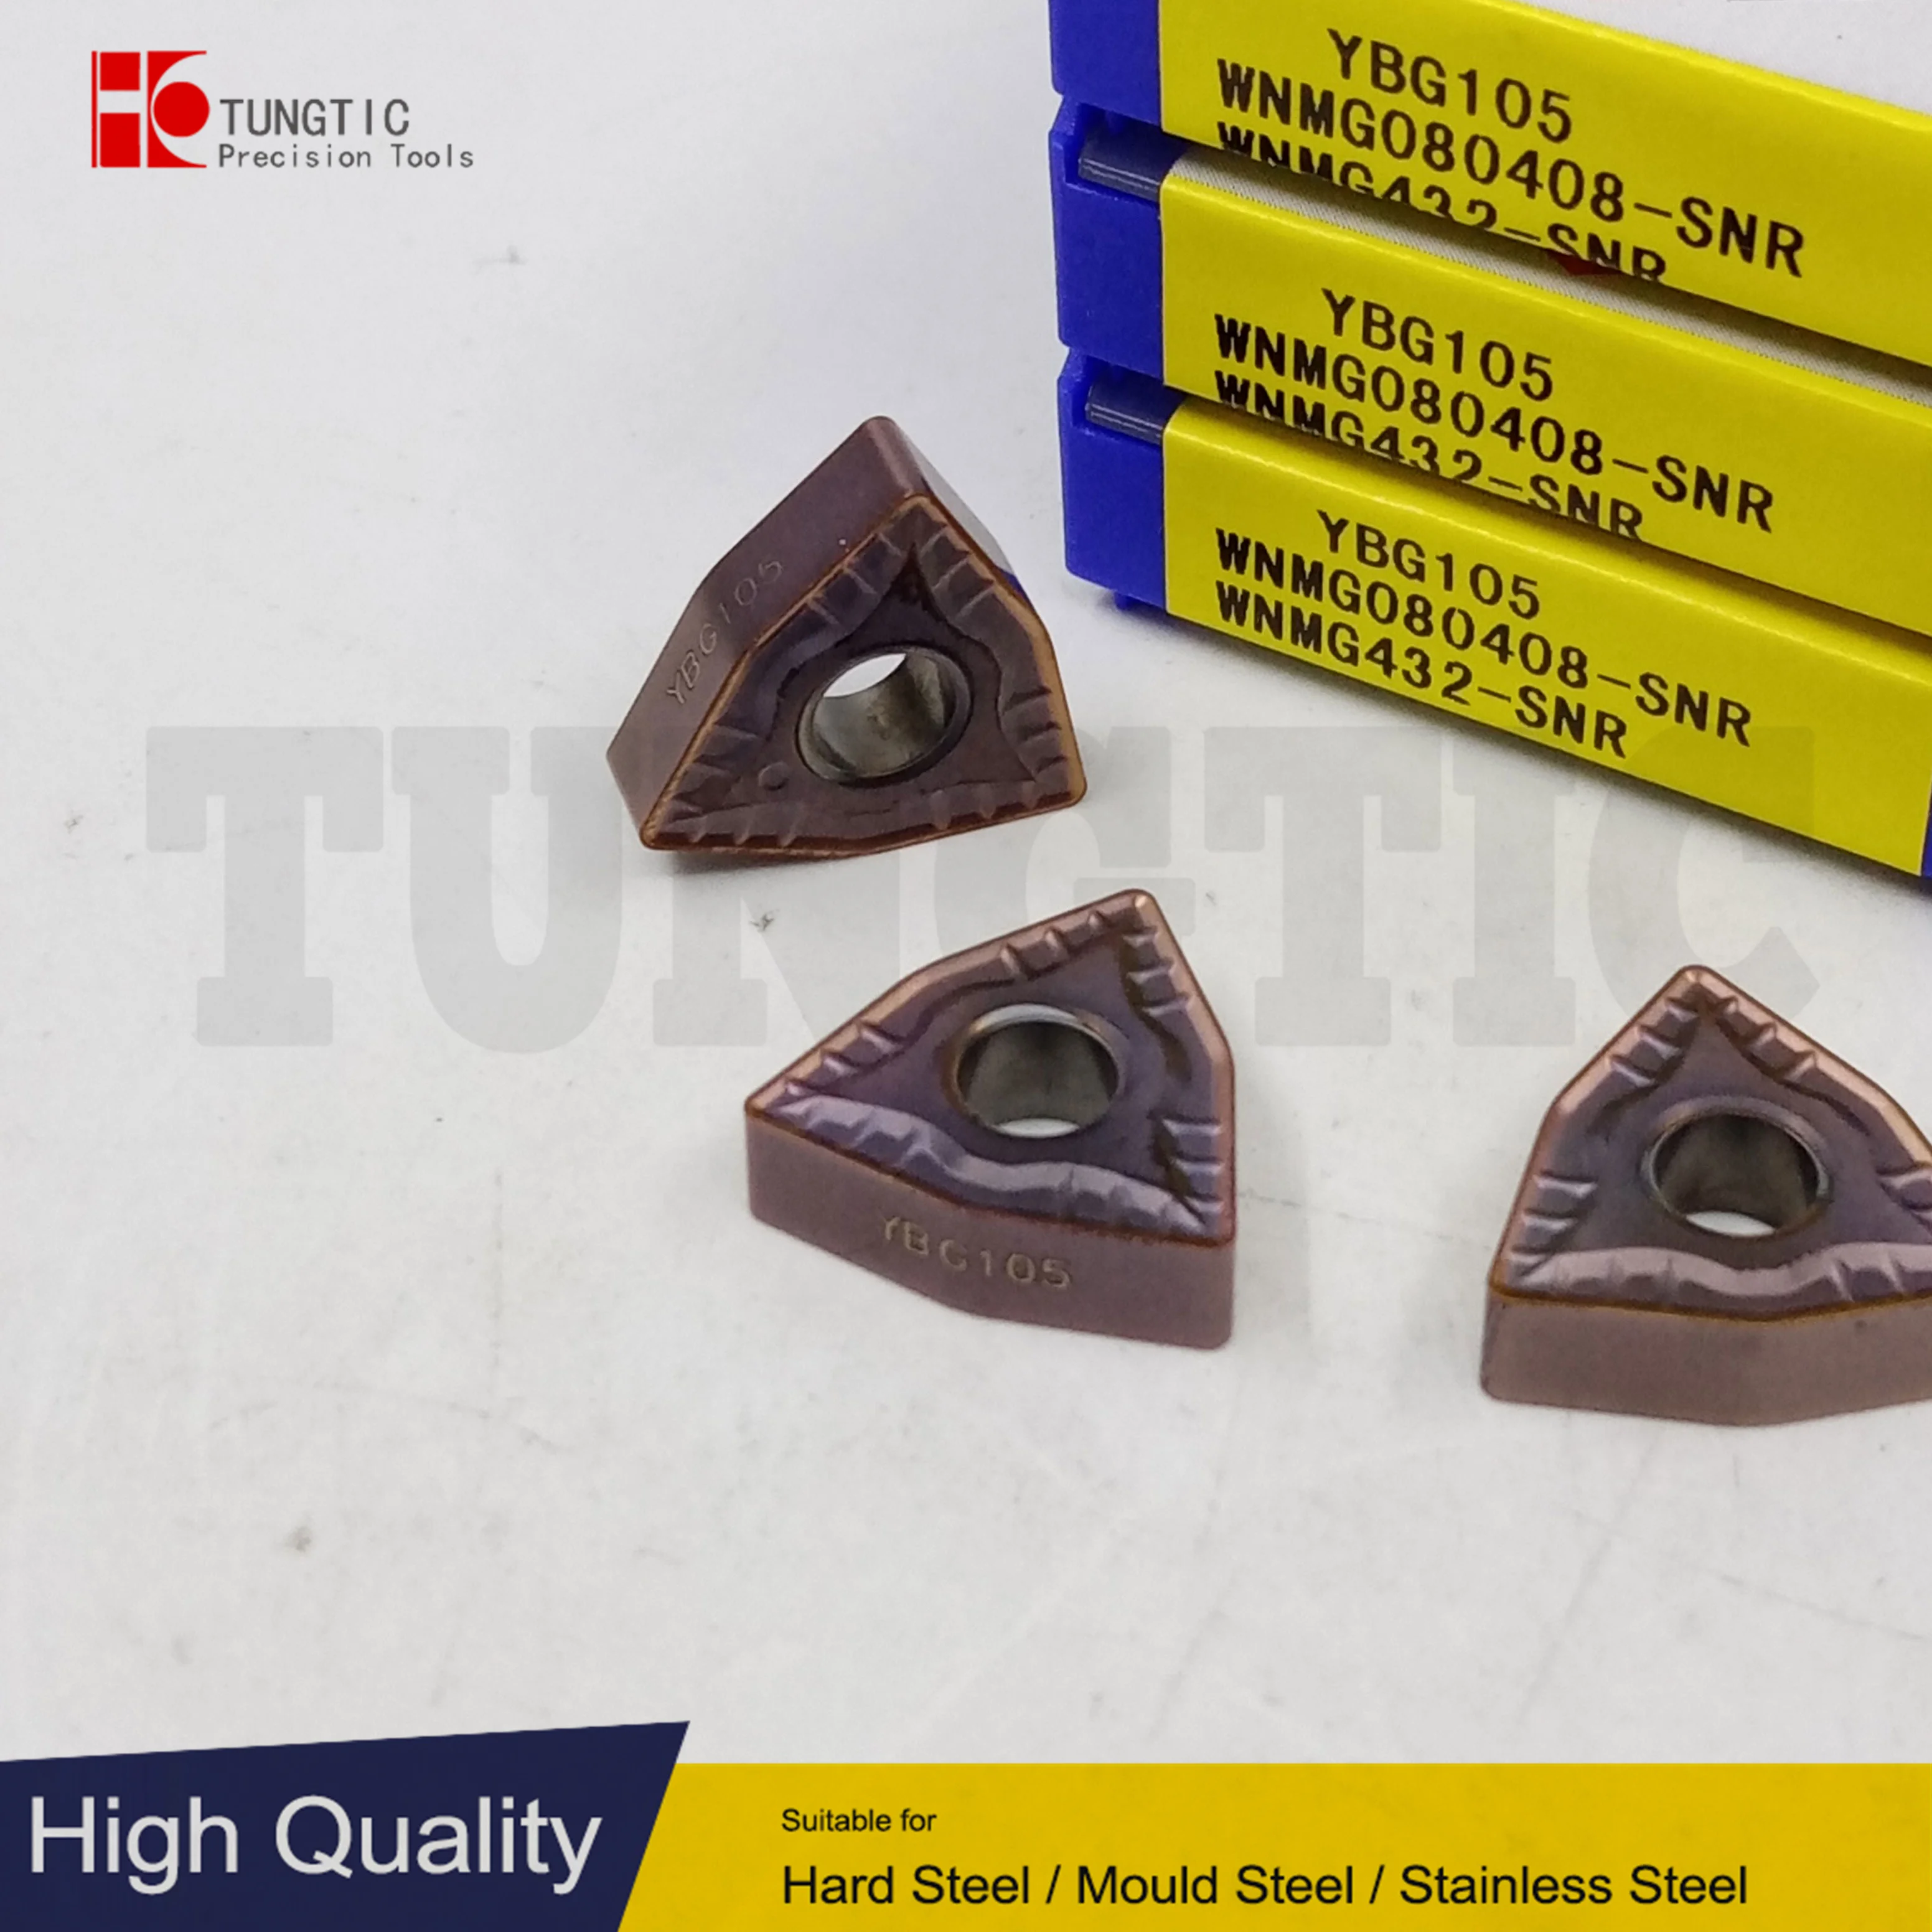 

TUNGTIC WNMG 080408-SNR WNMG080408-SNR Turning Inserts Carbide Cutter For Cast Iron